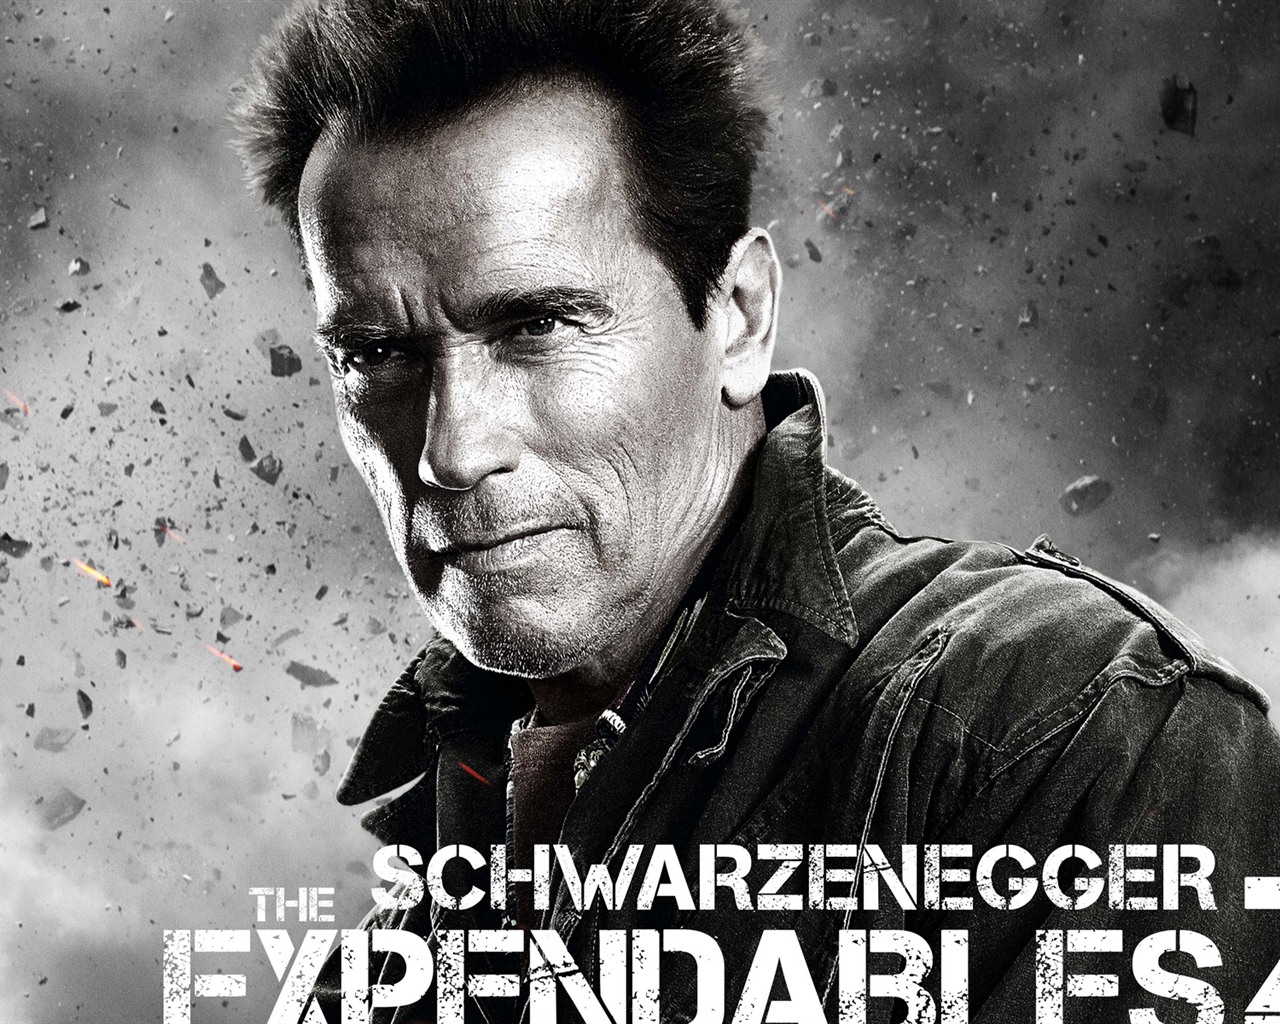 2012 Expendables2 HDの壁紙 #4 - 1280x1024